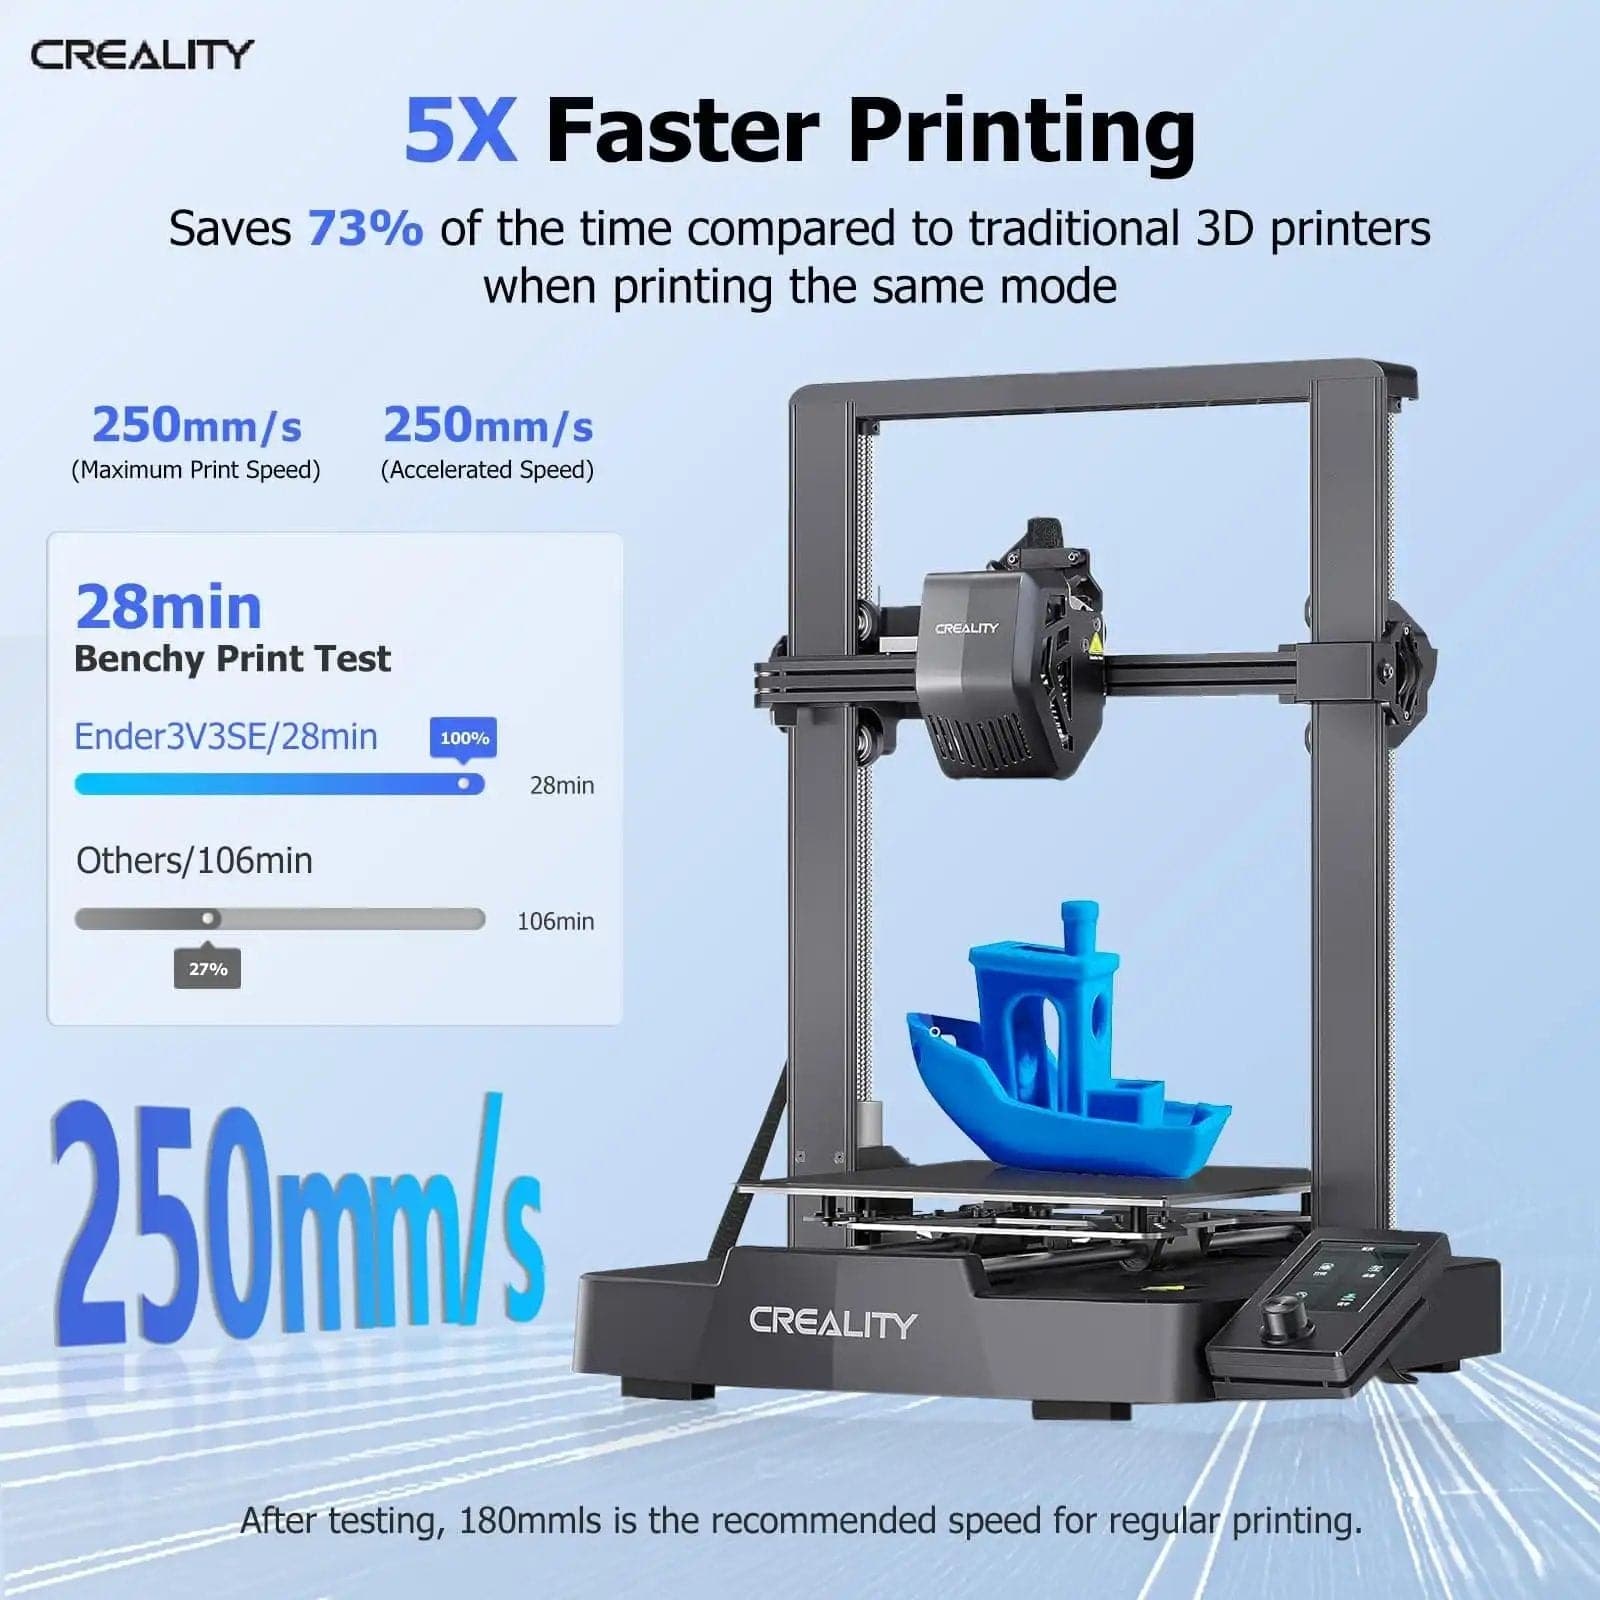 Creality Ender 3 V3 SE 3D Printer, 250mm/s Fast Printing 3D PrintersFeatures:

【Ship From Amazon FBA Warehouse】Same shipping service with Amazon. Enjoy reliable performance and fast shipping with the Amazon FBA Warehouse.


【3D PrintCreality Ender 3 V3 SE 3D Printer, 250mm/3D Printer